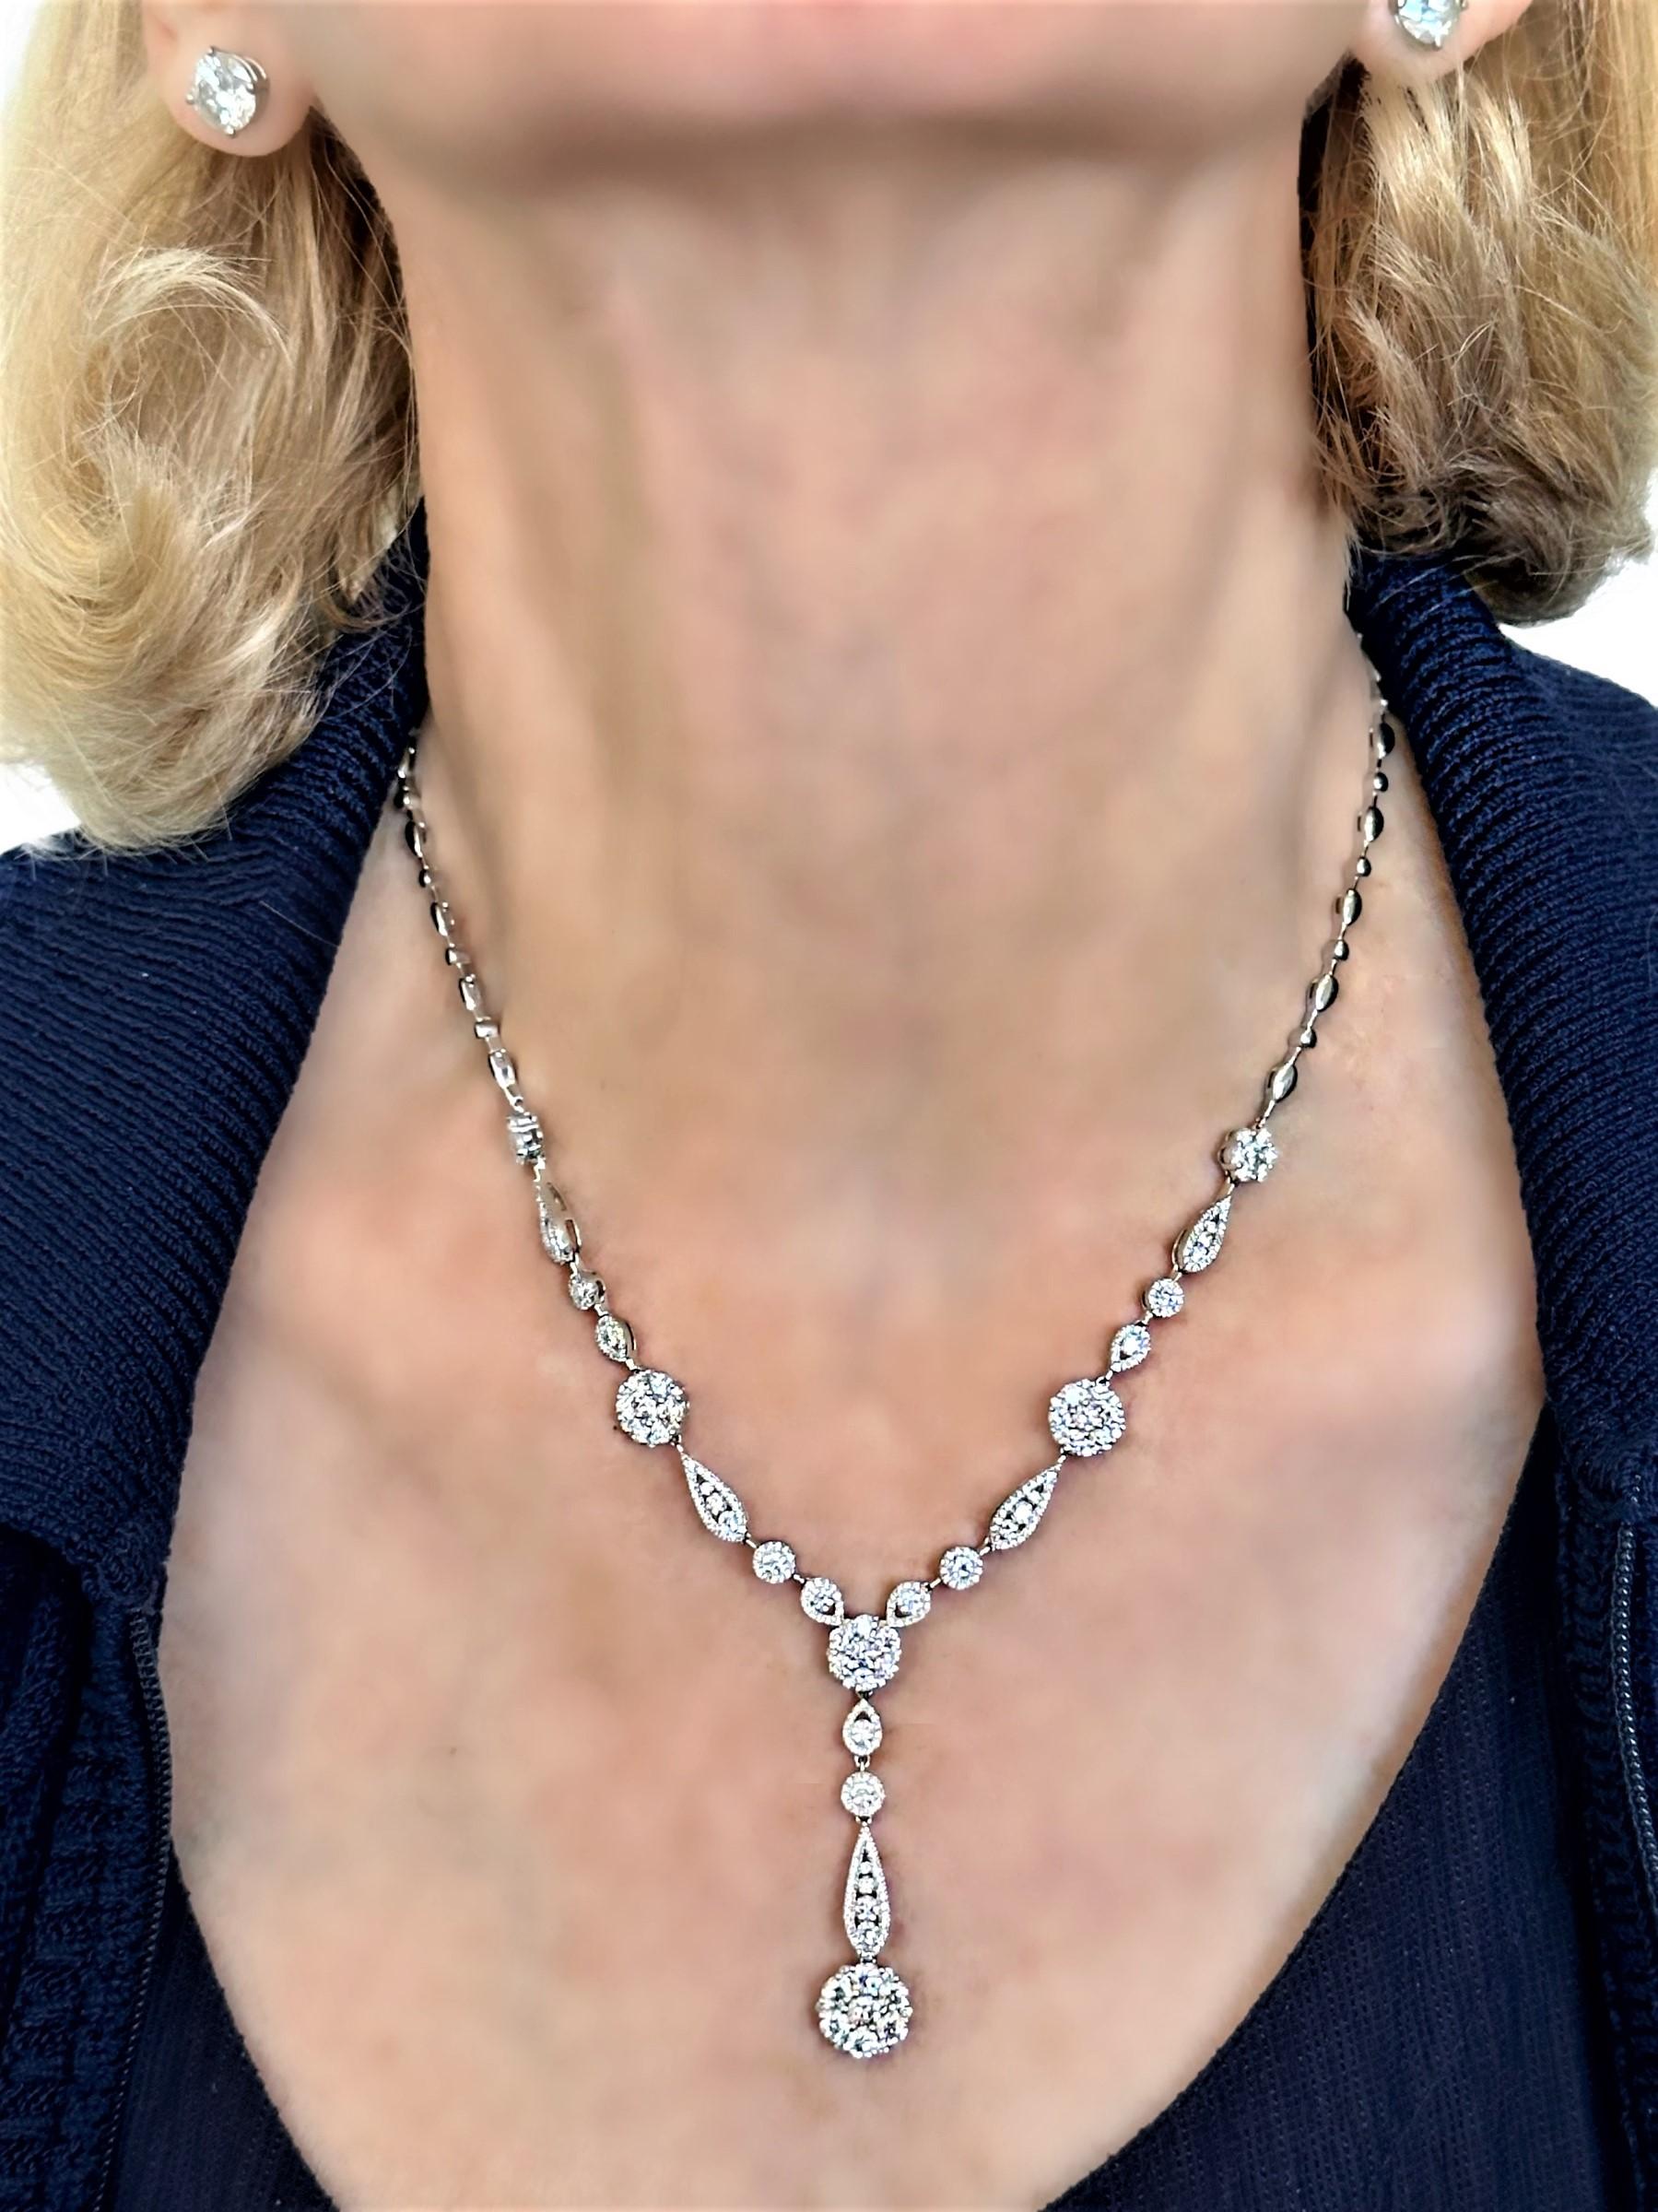 Scintillating Modern 18K White Gold Diamond Fashion Necklace with Drop For Sale 4